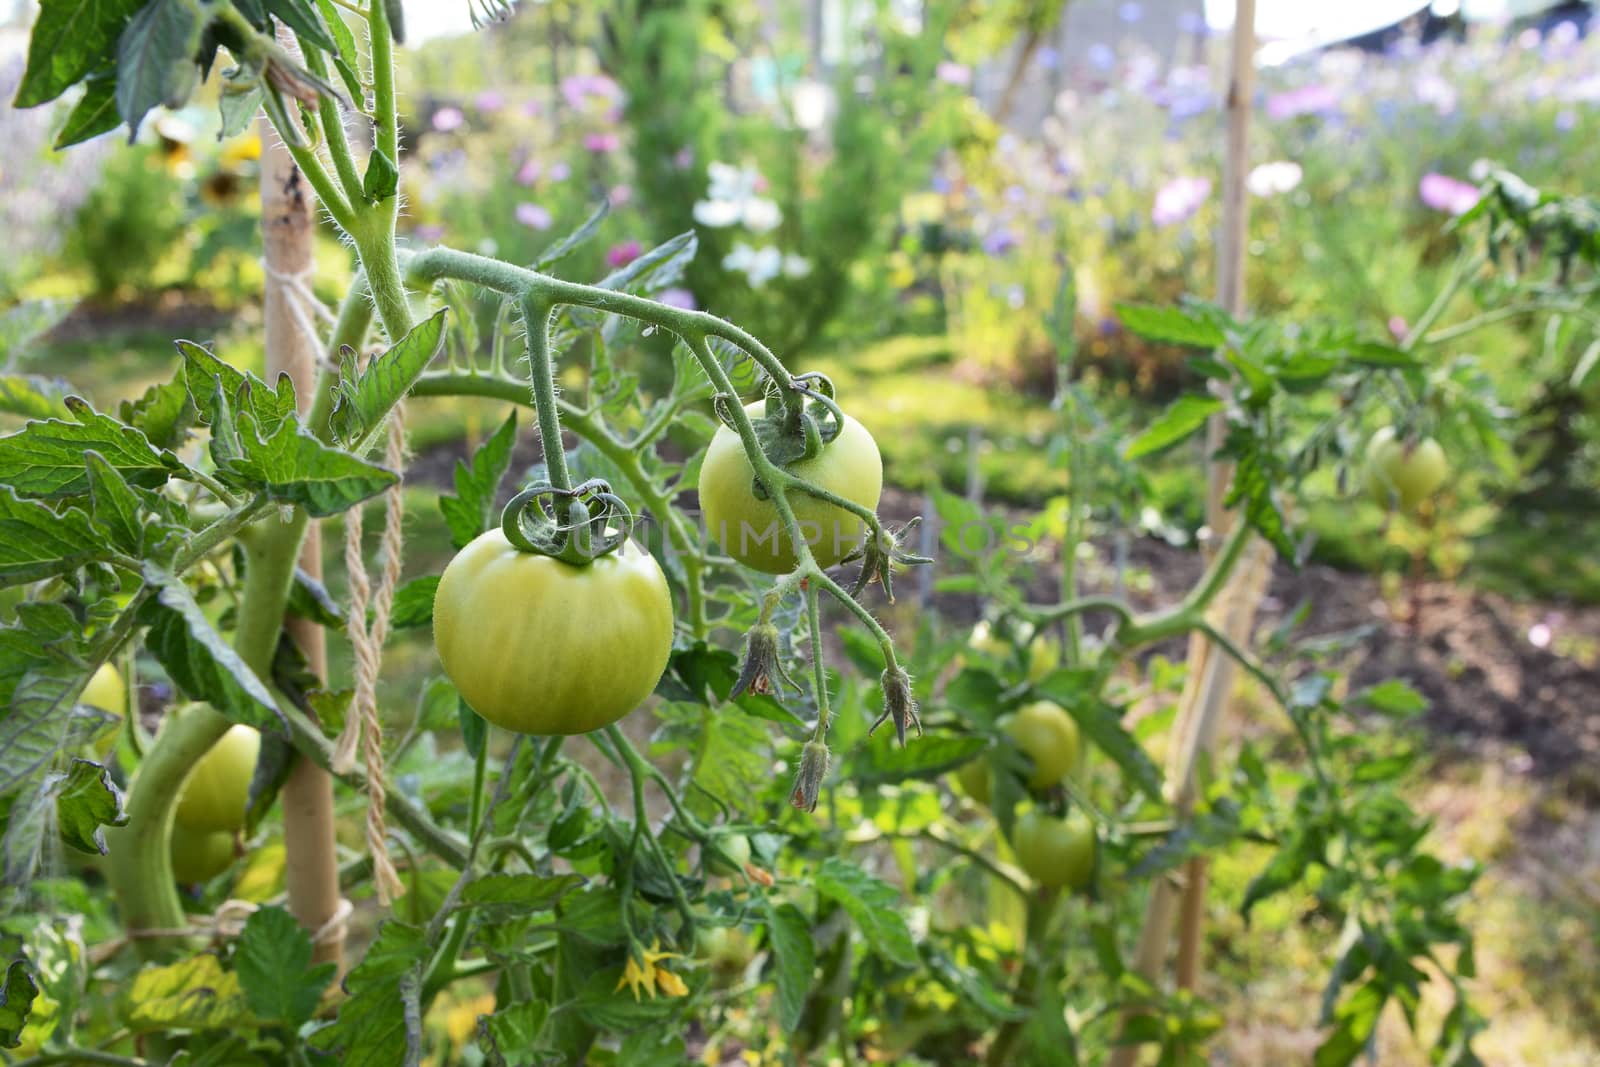 Ferline cordon tomato plant with green fruit by sarahdoow